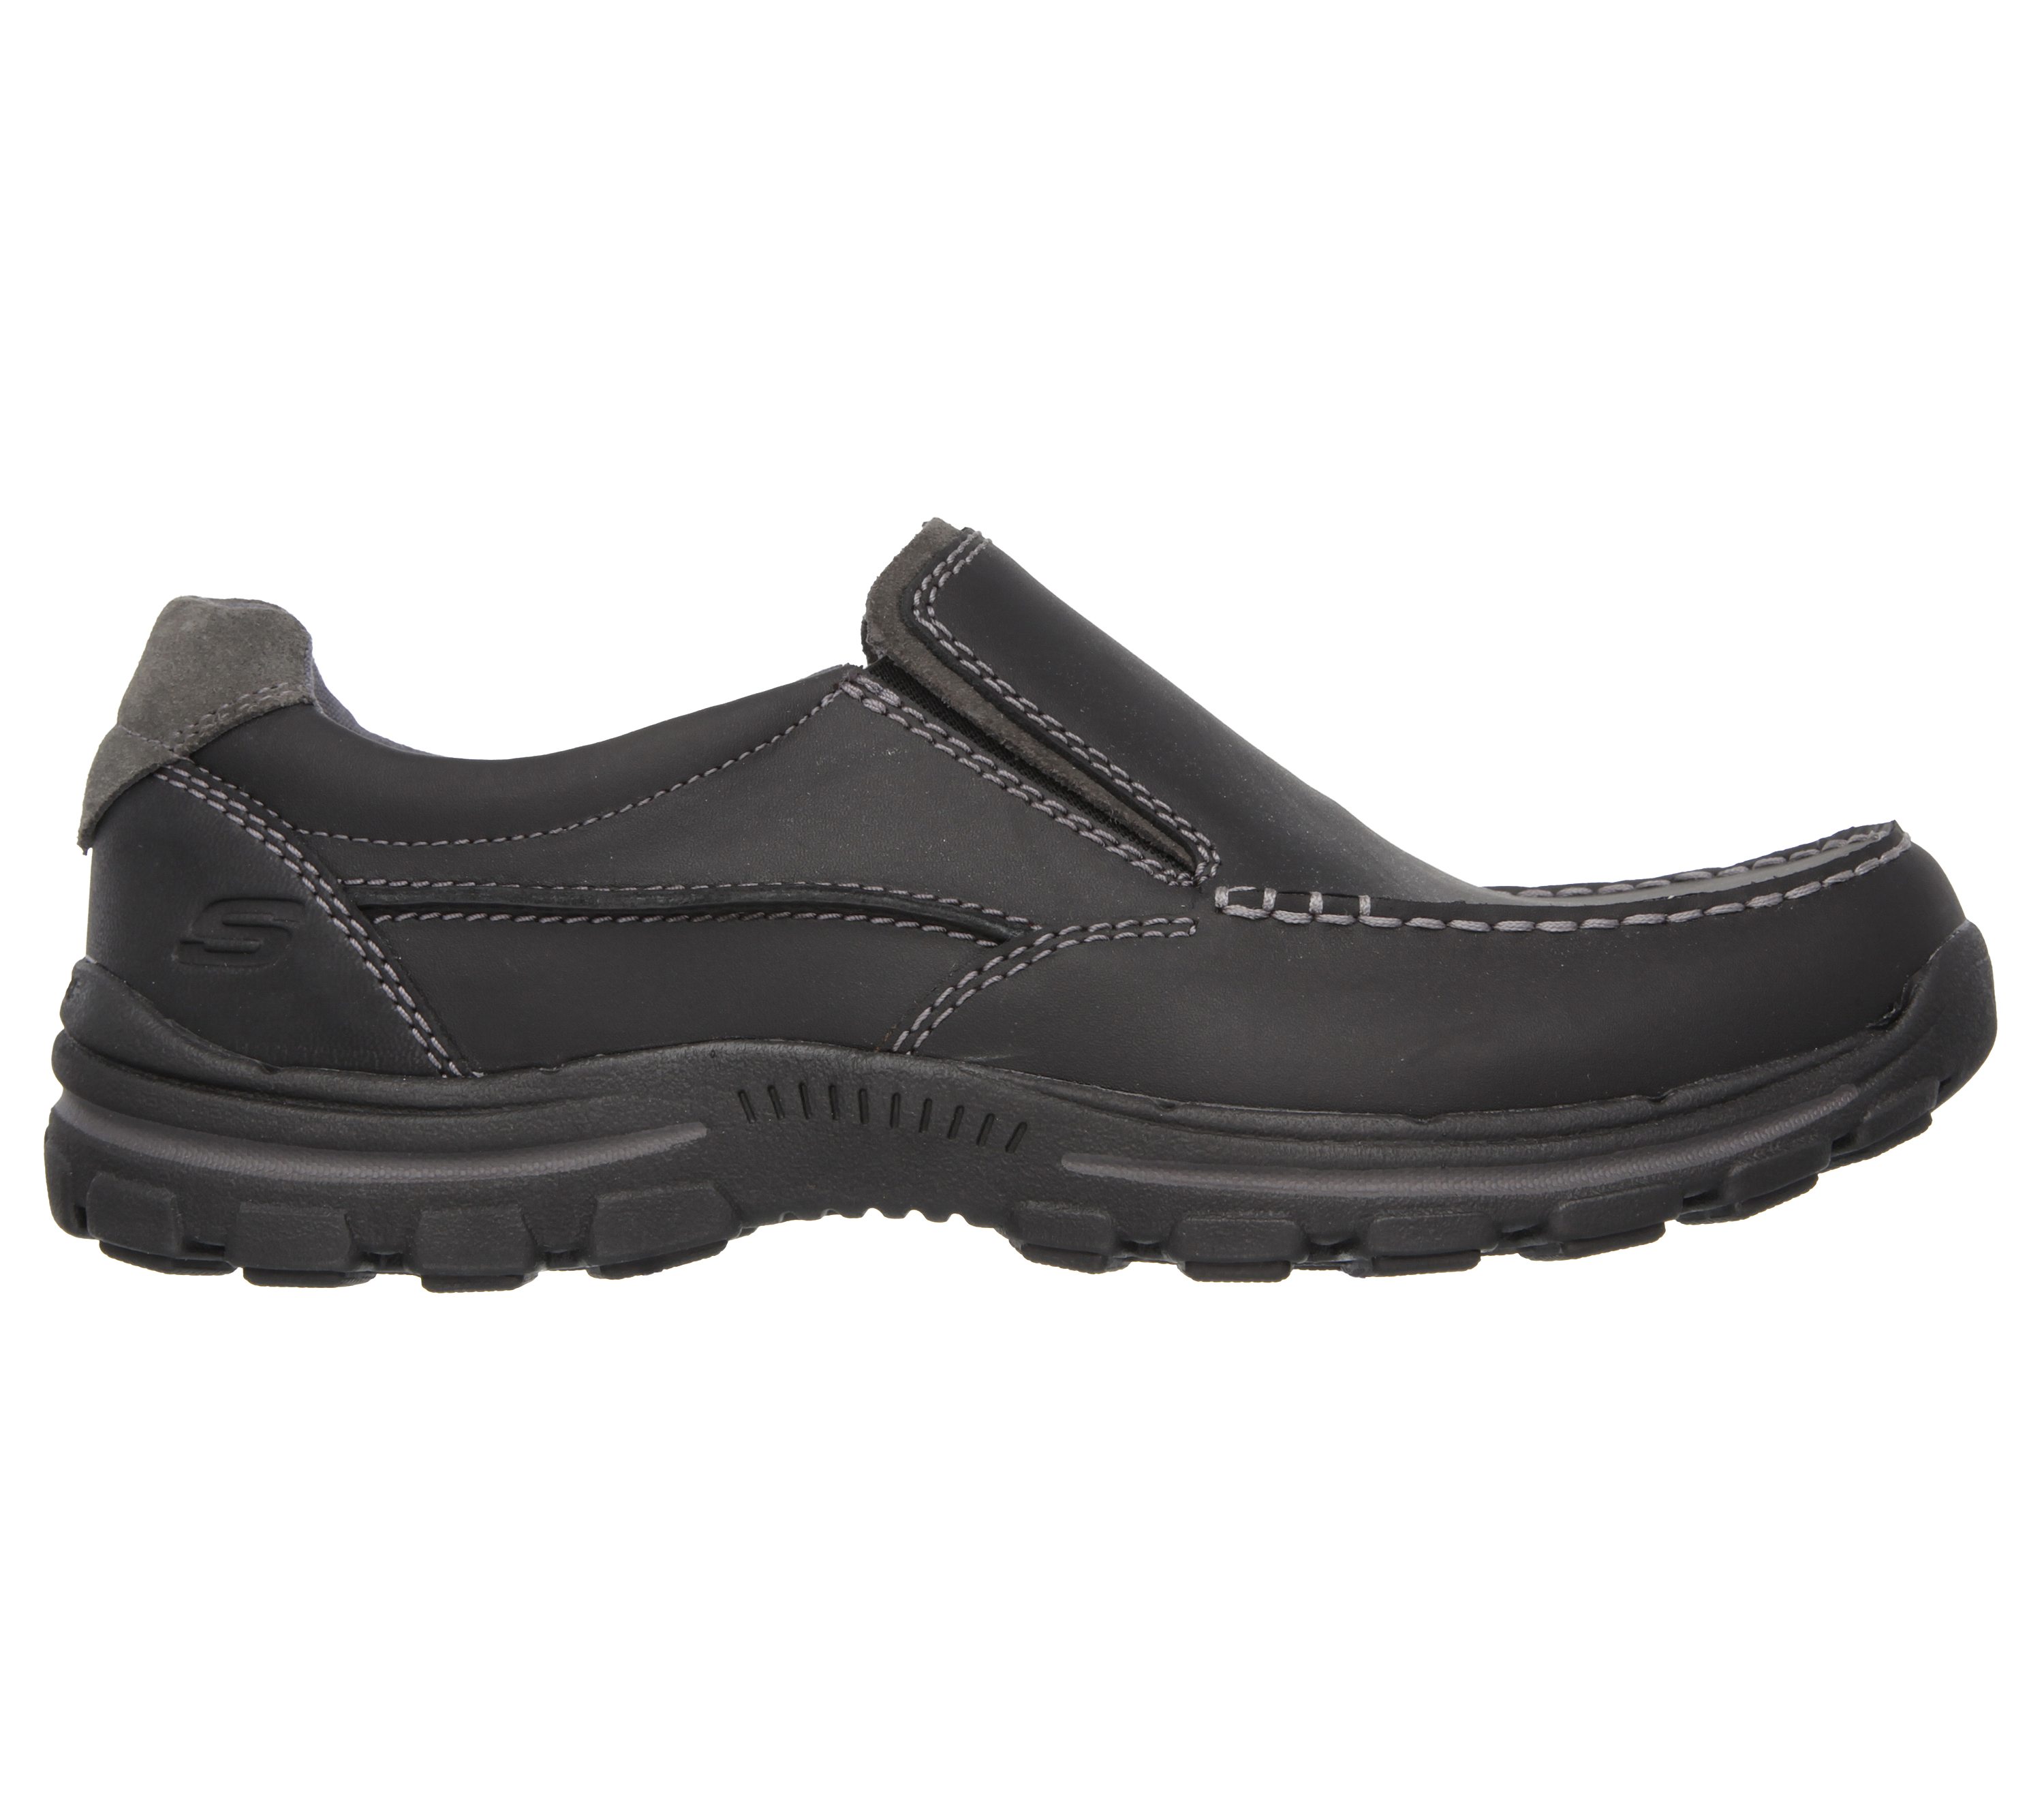 skechers men's braver rayland casual shoes